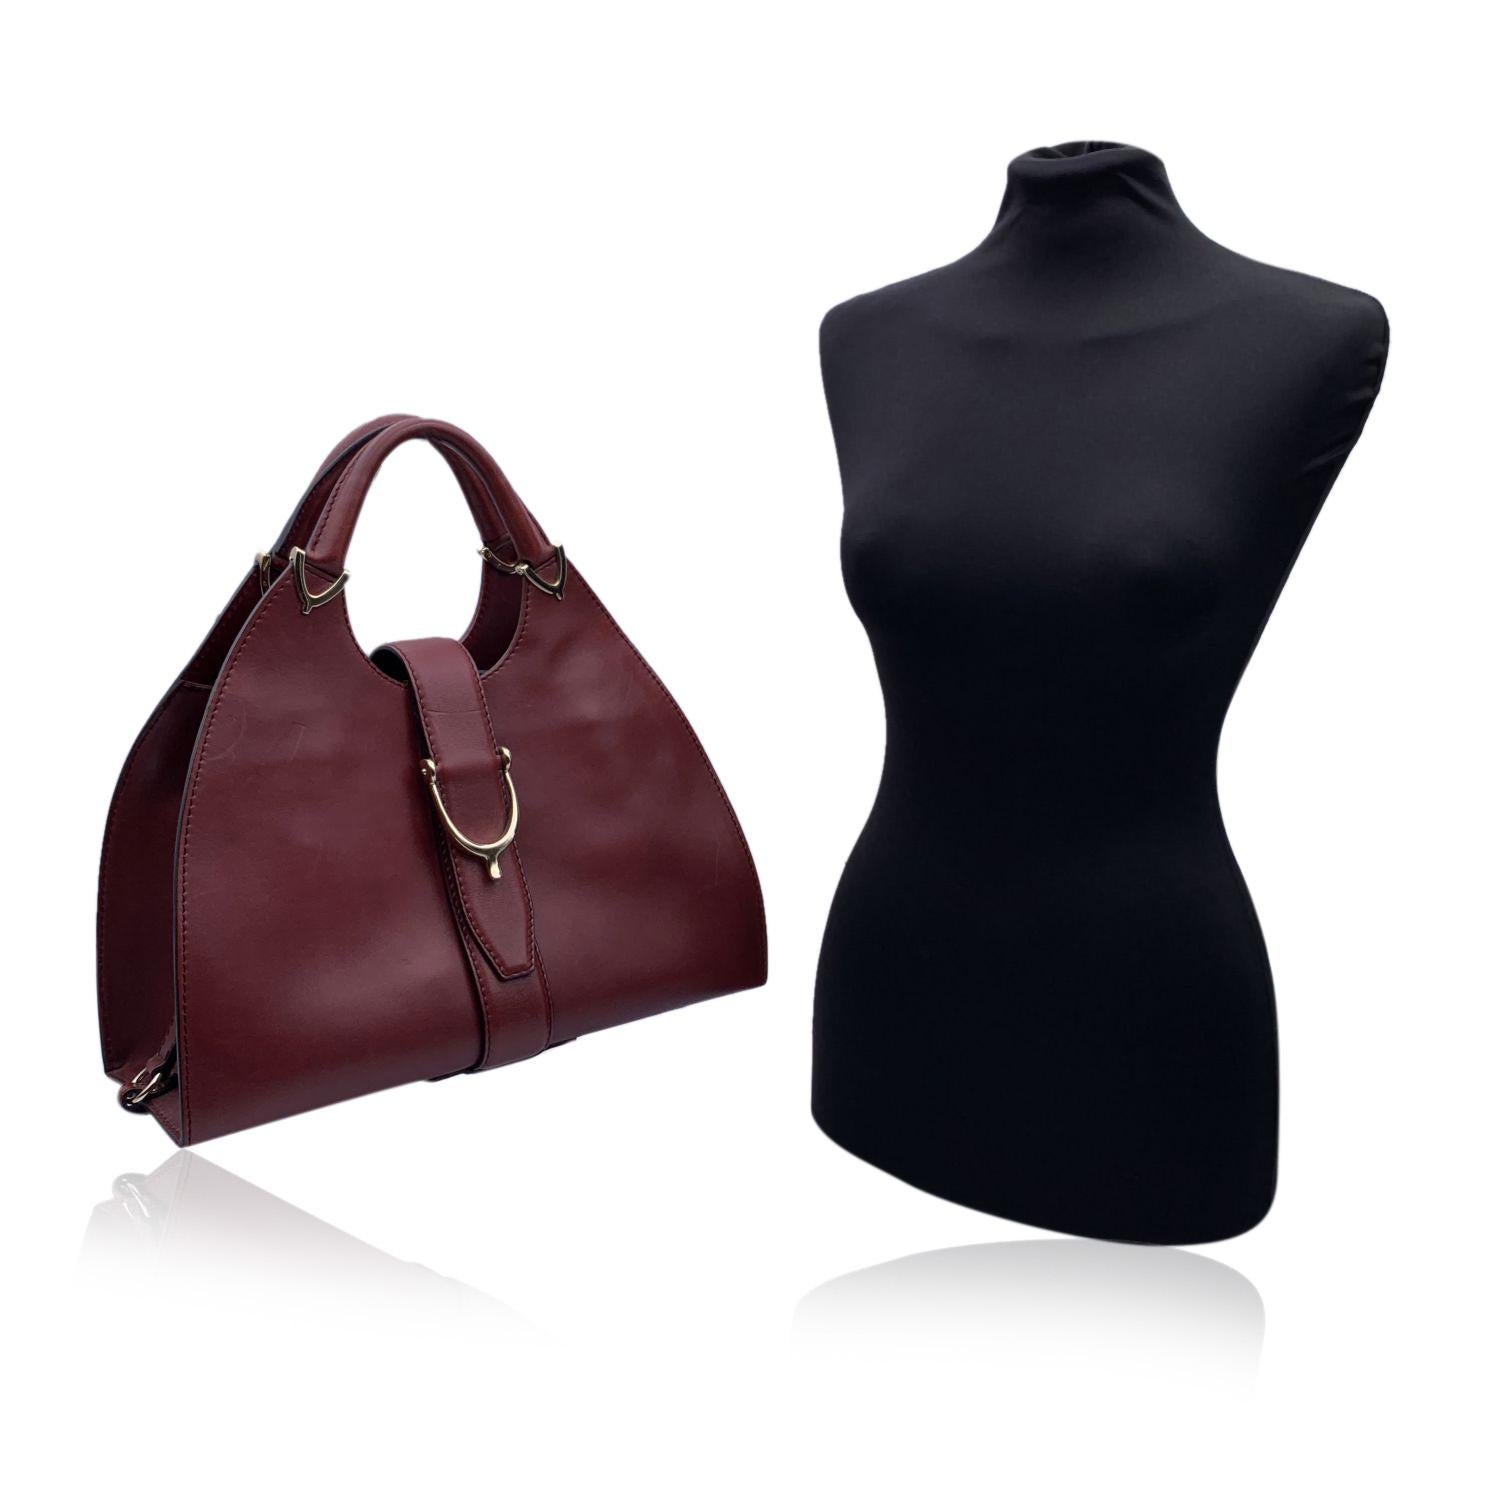 Beautiful Gucci 'Stirrup' hobo bag, crafted in burgundy leather. Light gold hardware. Fold over strap with button closure. Spur detailing on the front and on the handles. Canvas interior with 1 side zip pocket inside and 3 side open pockets. Gucci